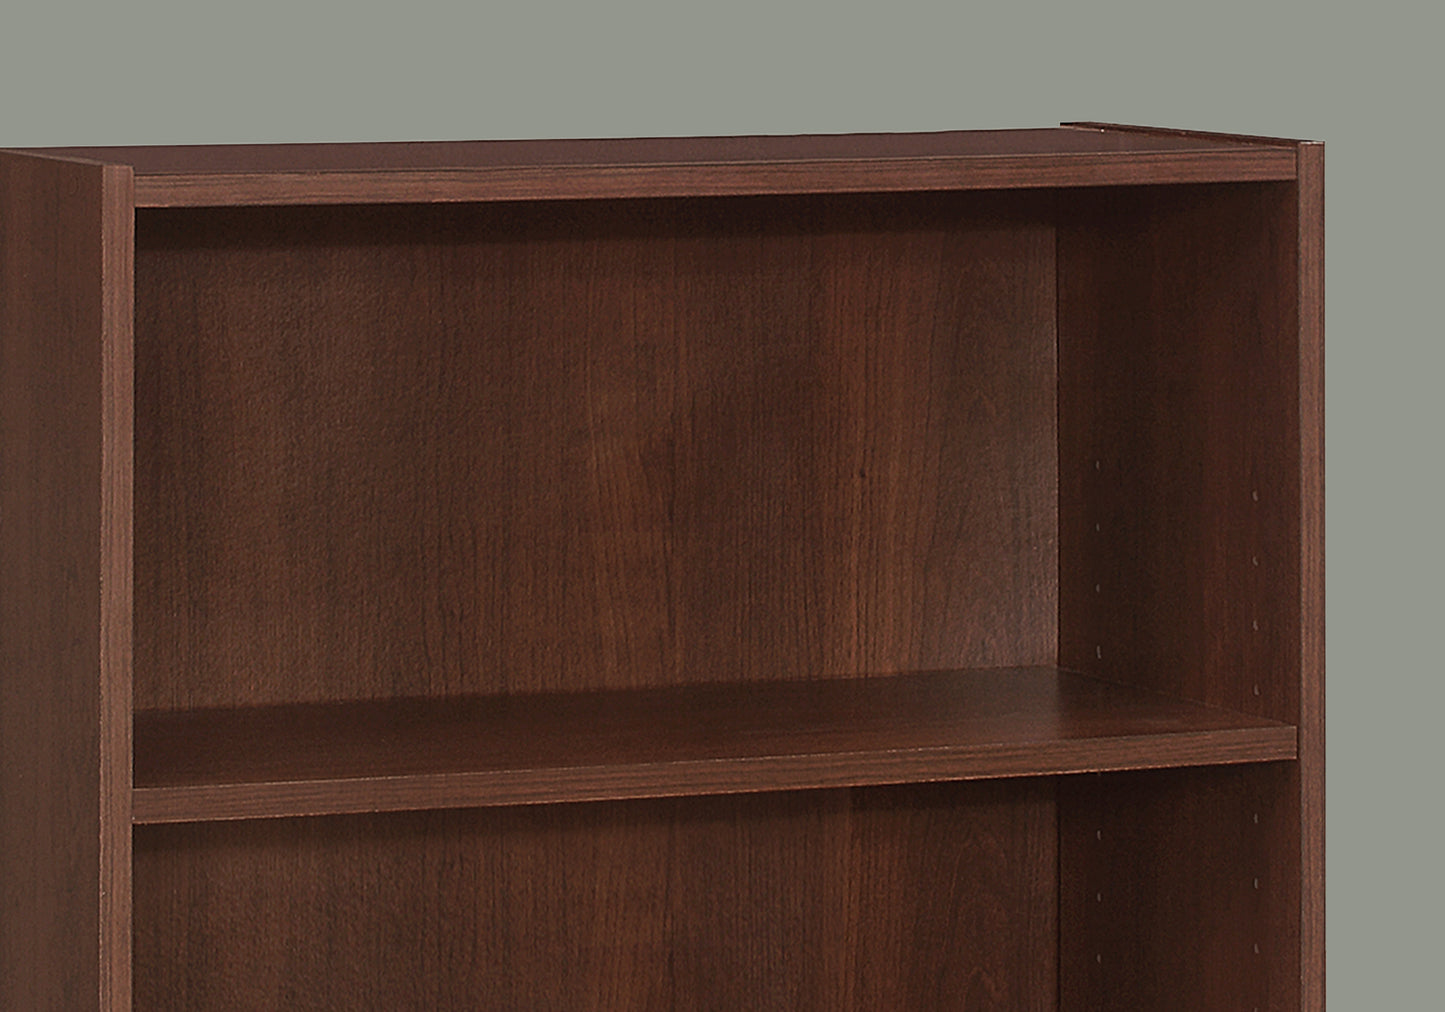 Transitional 36"H 3 Shelf Bookcase in Cherry Finish